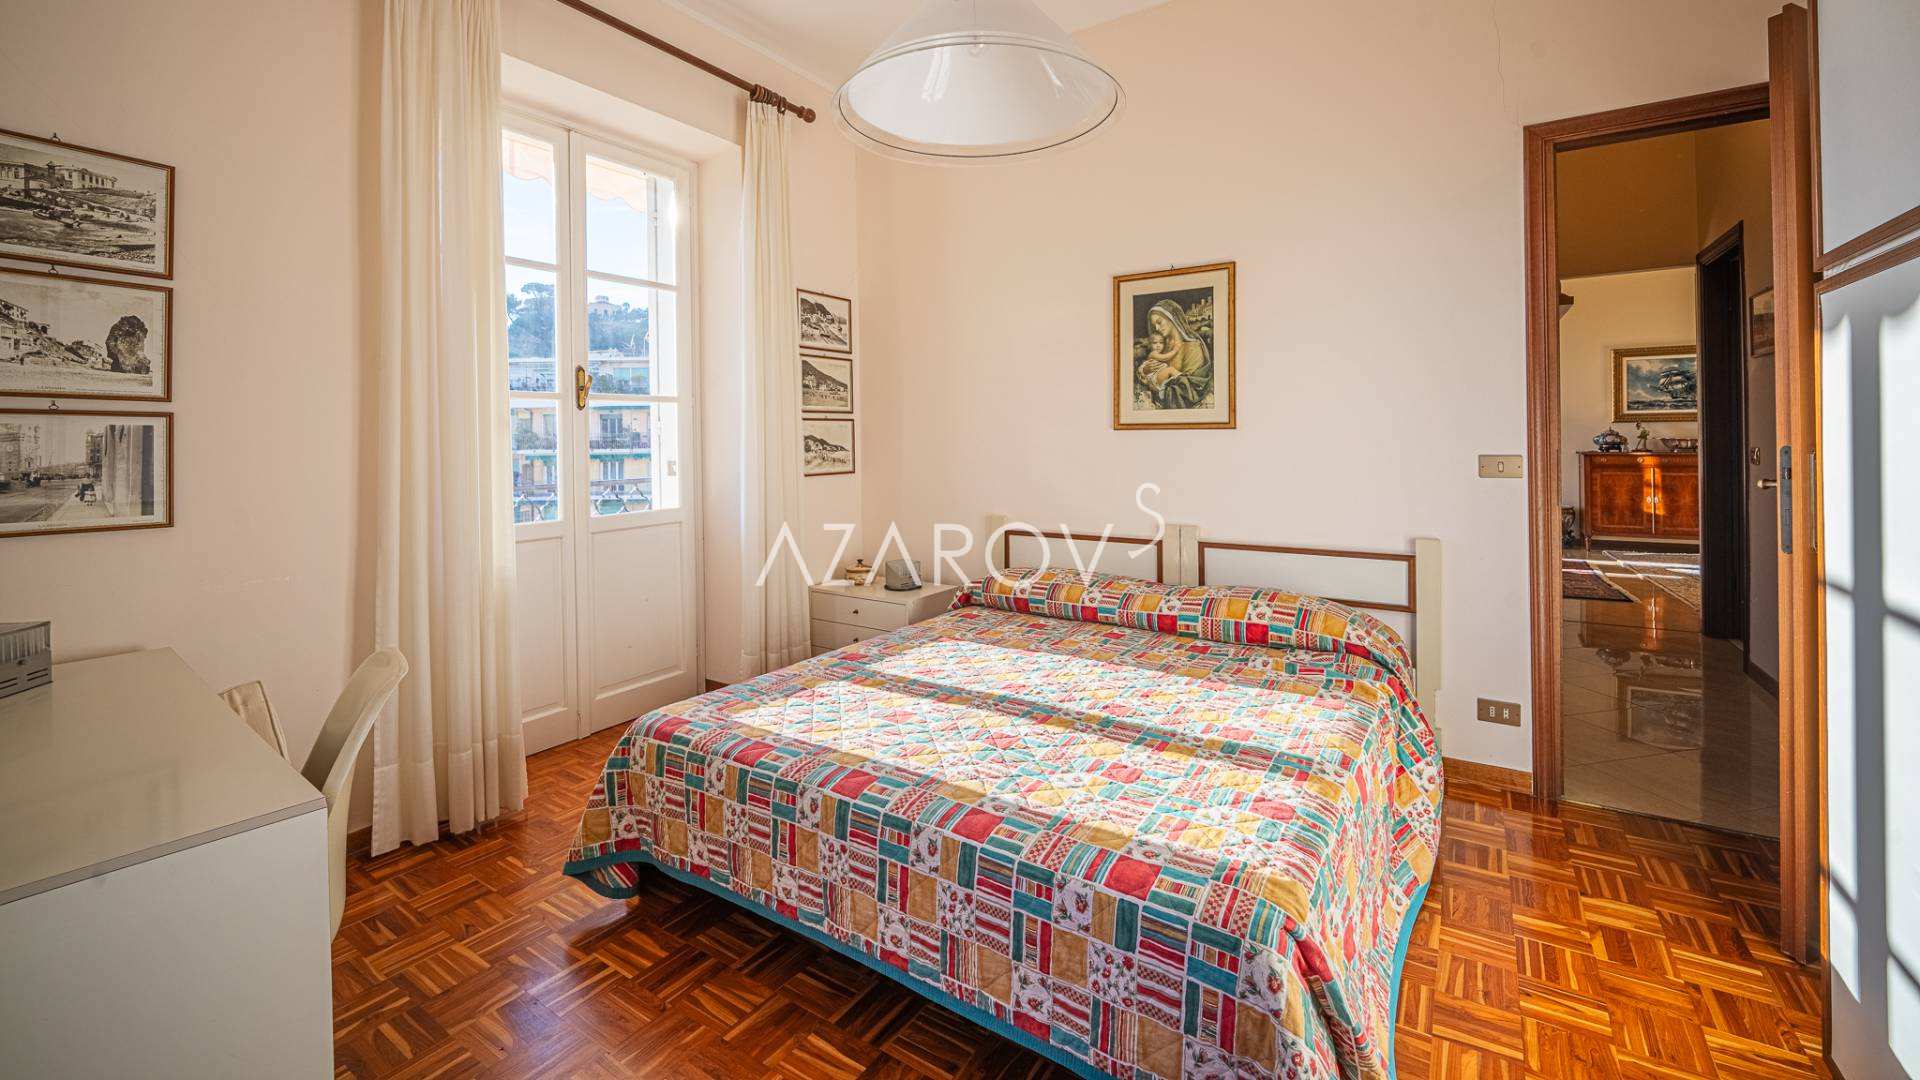 Apartment for sale in the center of Sanremo with sea views